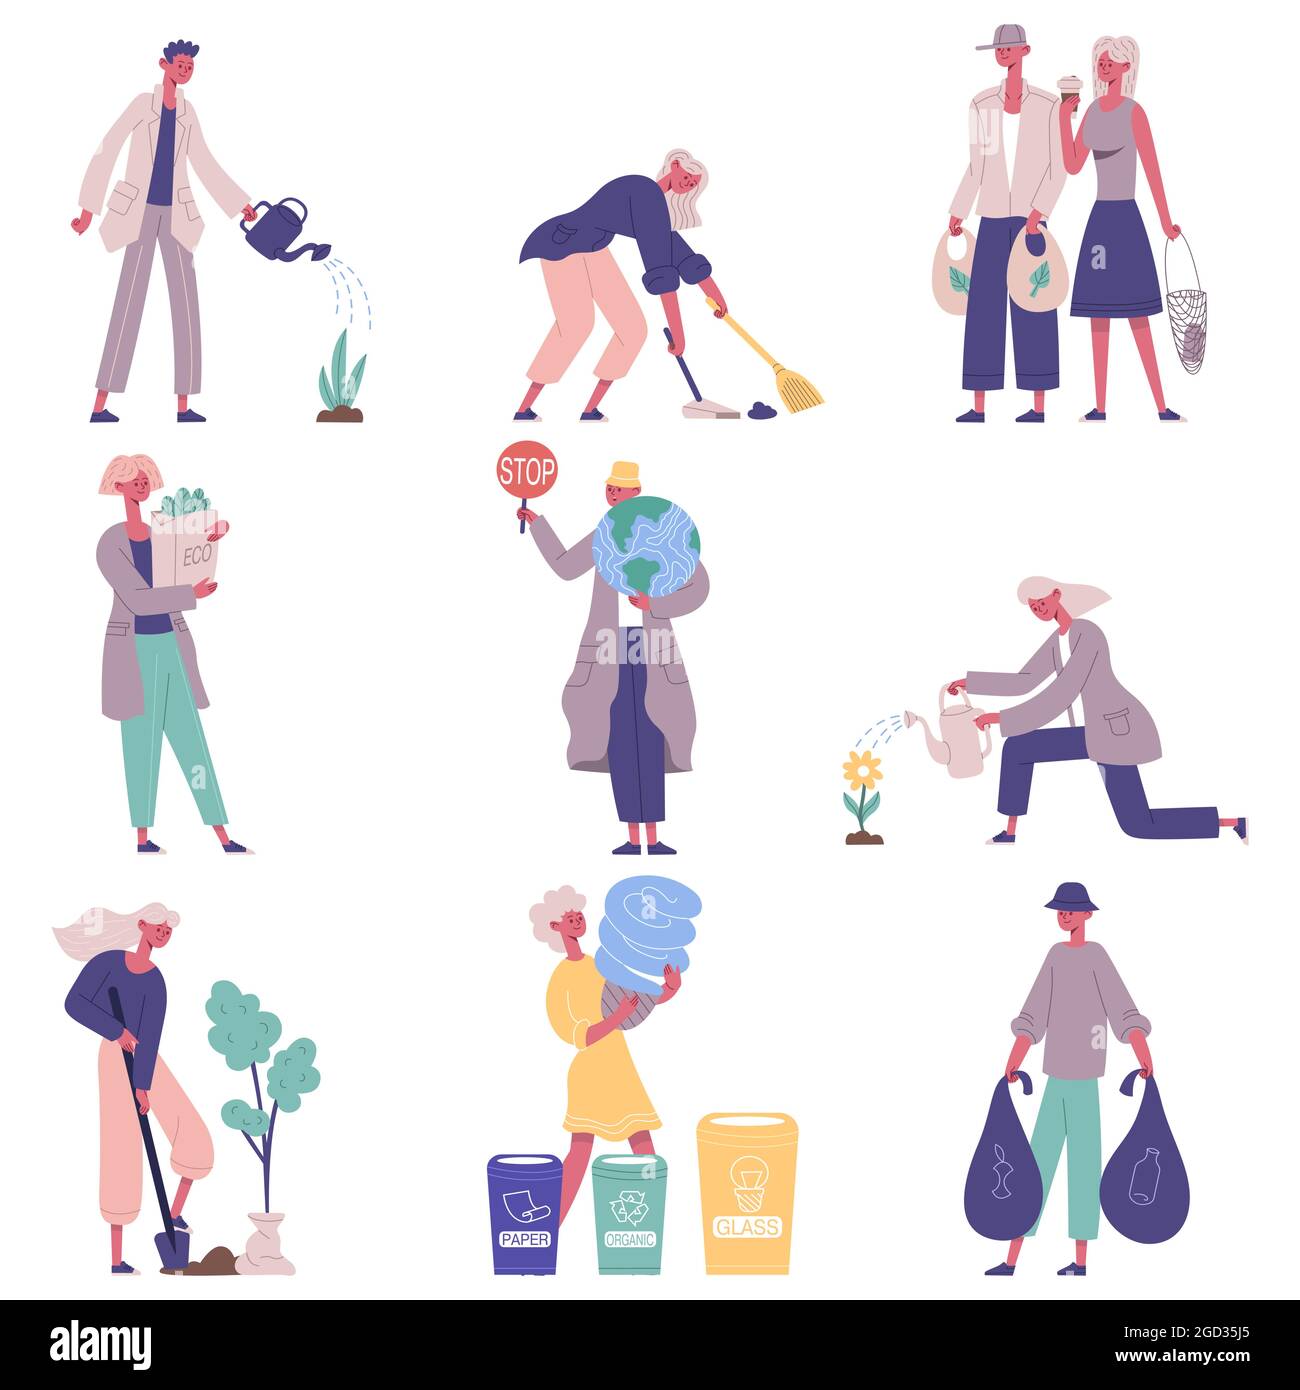 People protect, take care nature and ecology environment. Eco friendly people growing plants, sorting waste vector illustration set. Environmental Stock Vector